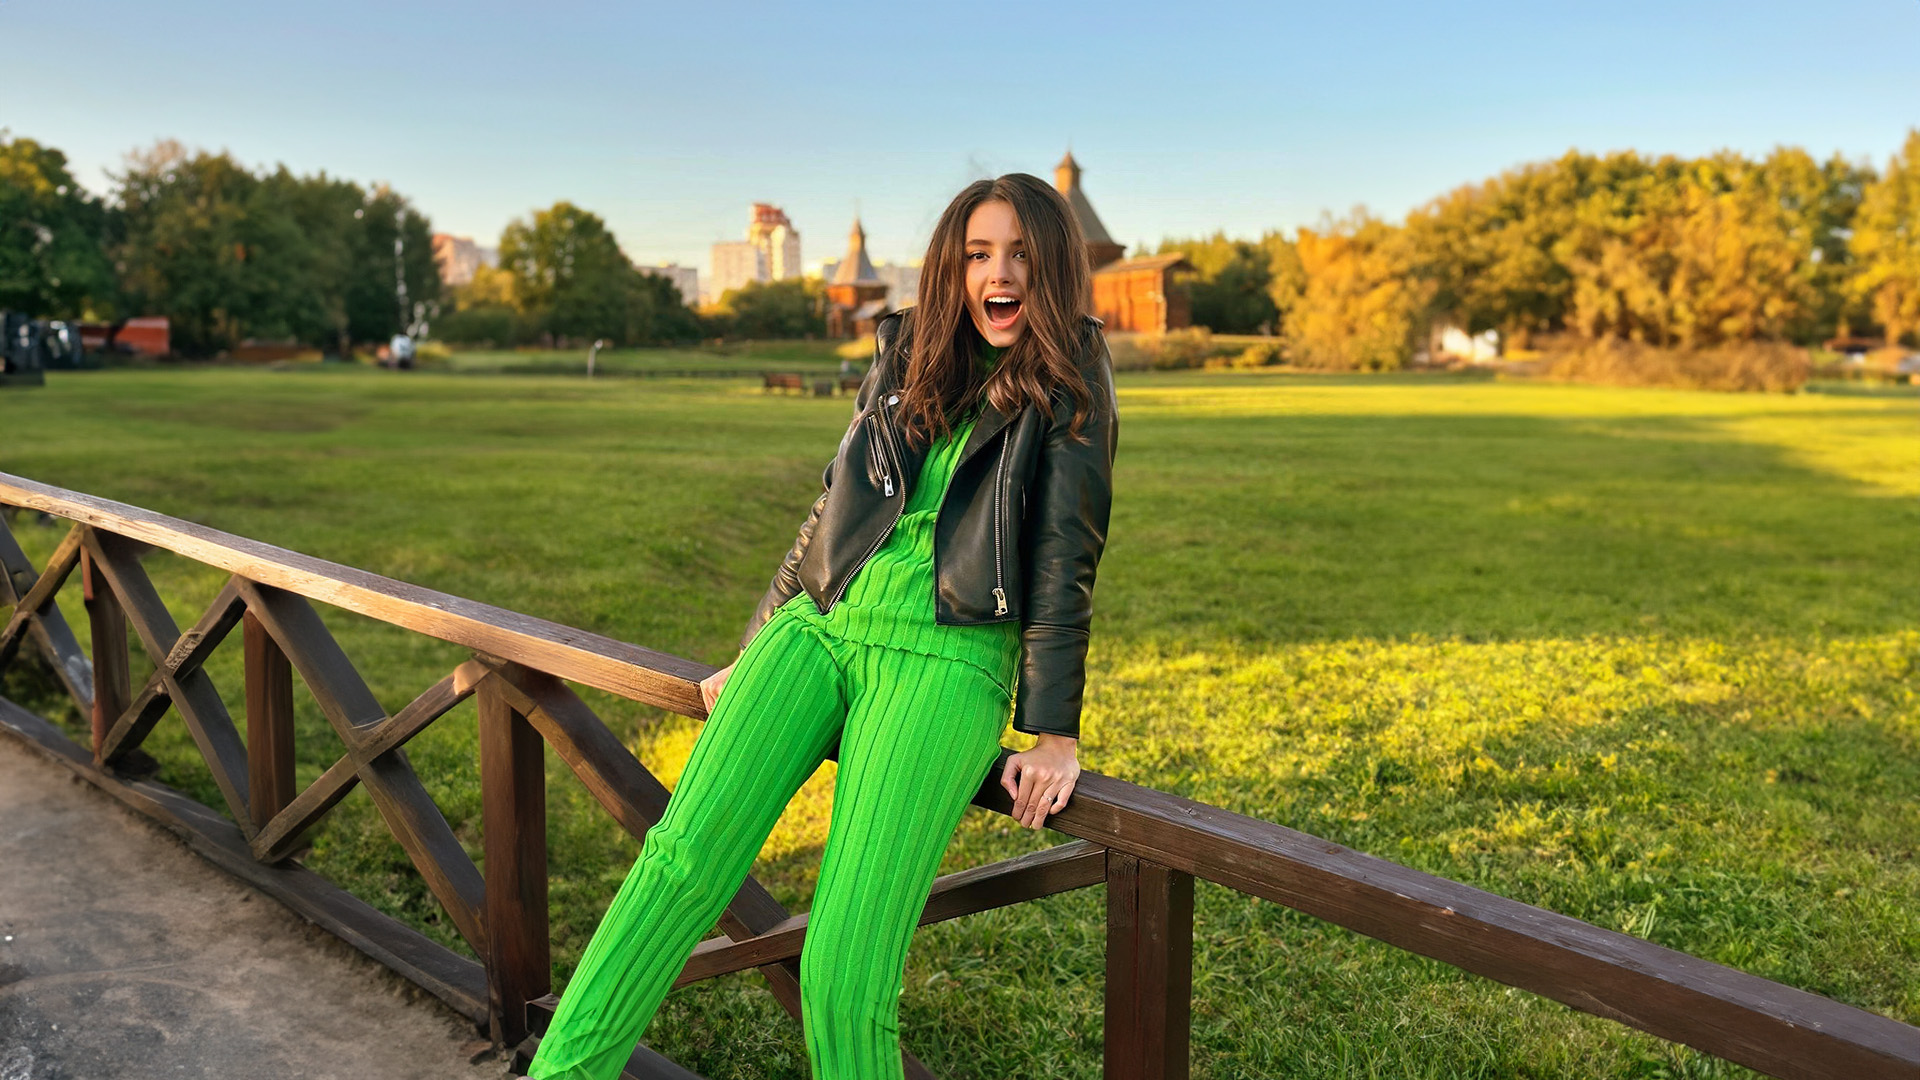 People 1920x1080 model grass nature brunette women open mouth leather jacket green clothing fence field women outdoors